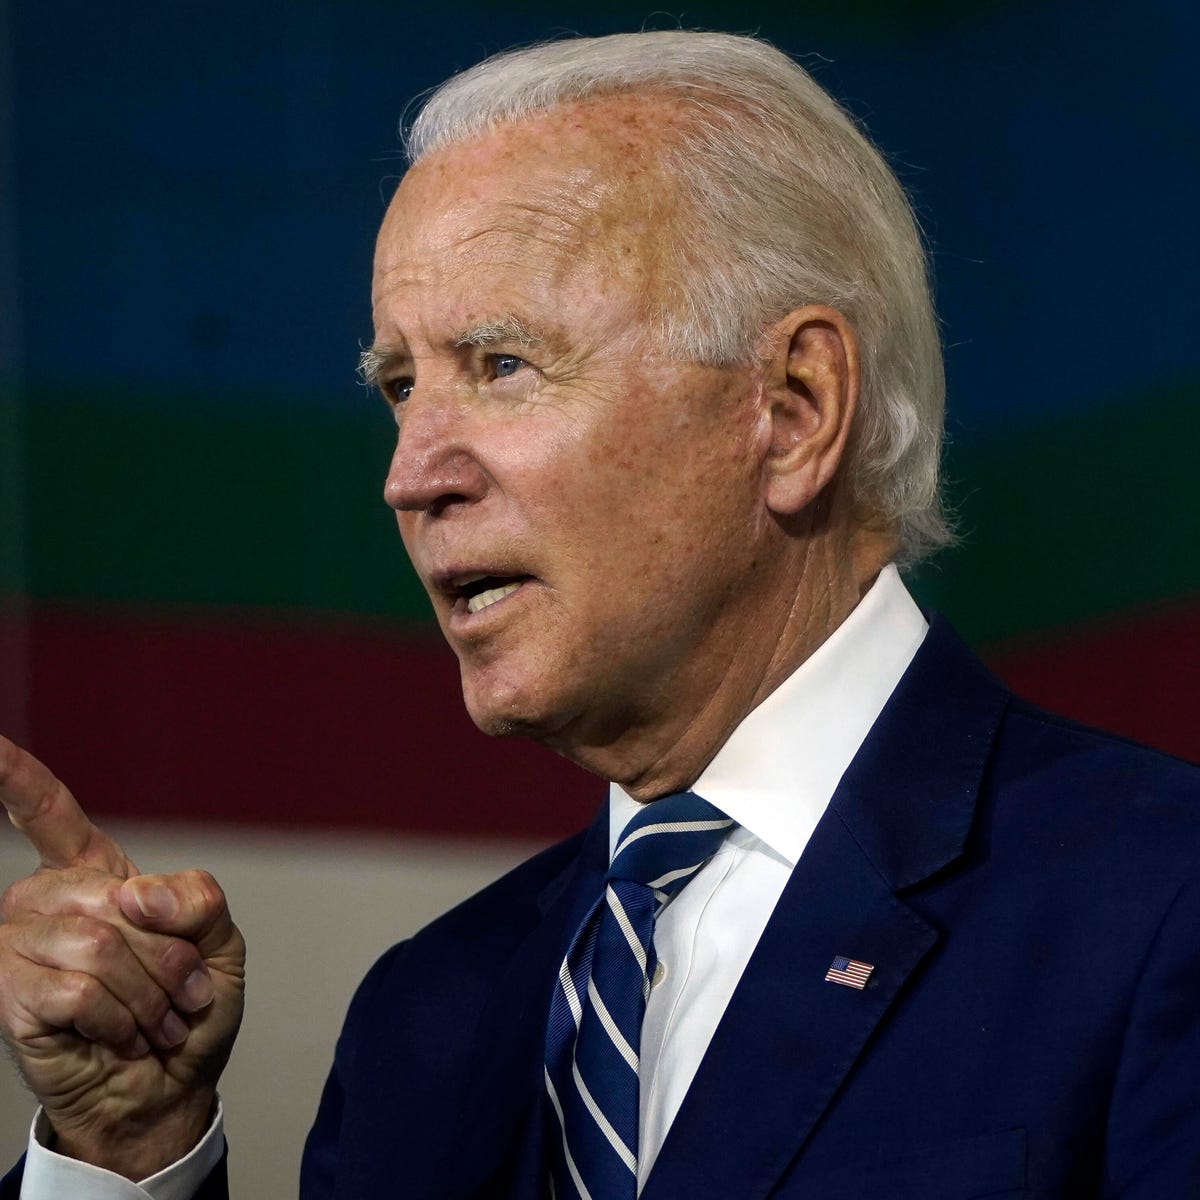 Biden seeks return greater competition among ISPs in executive order -